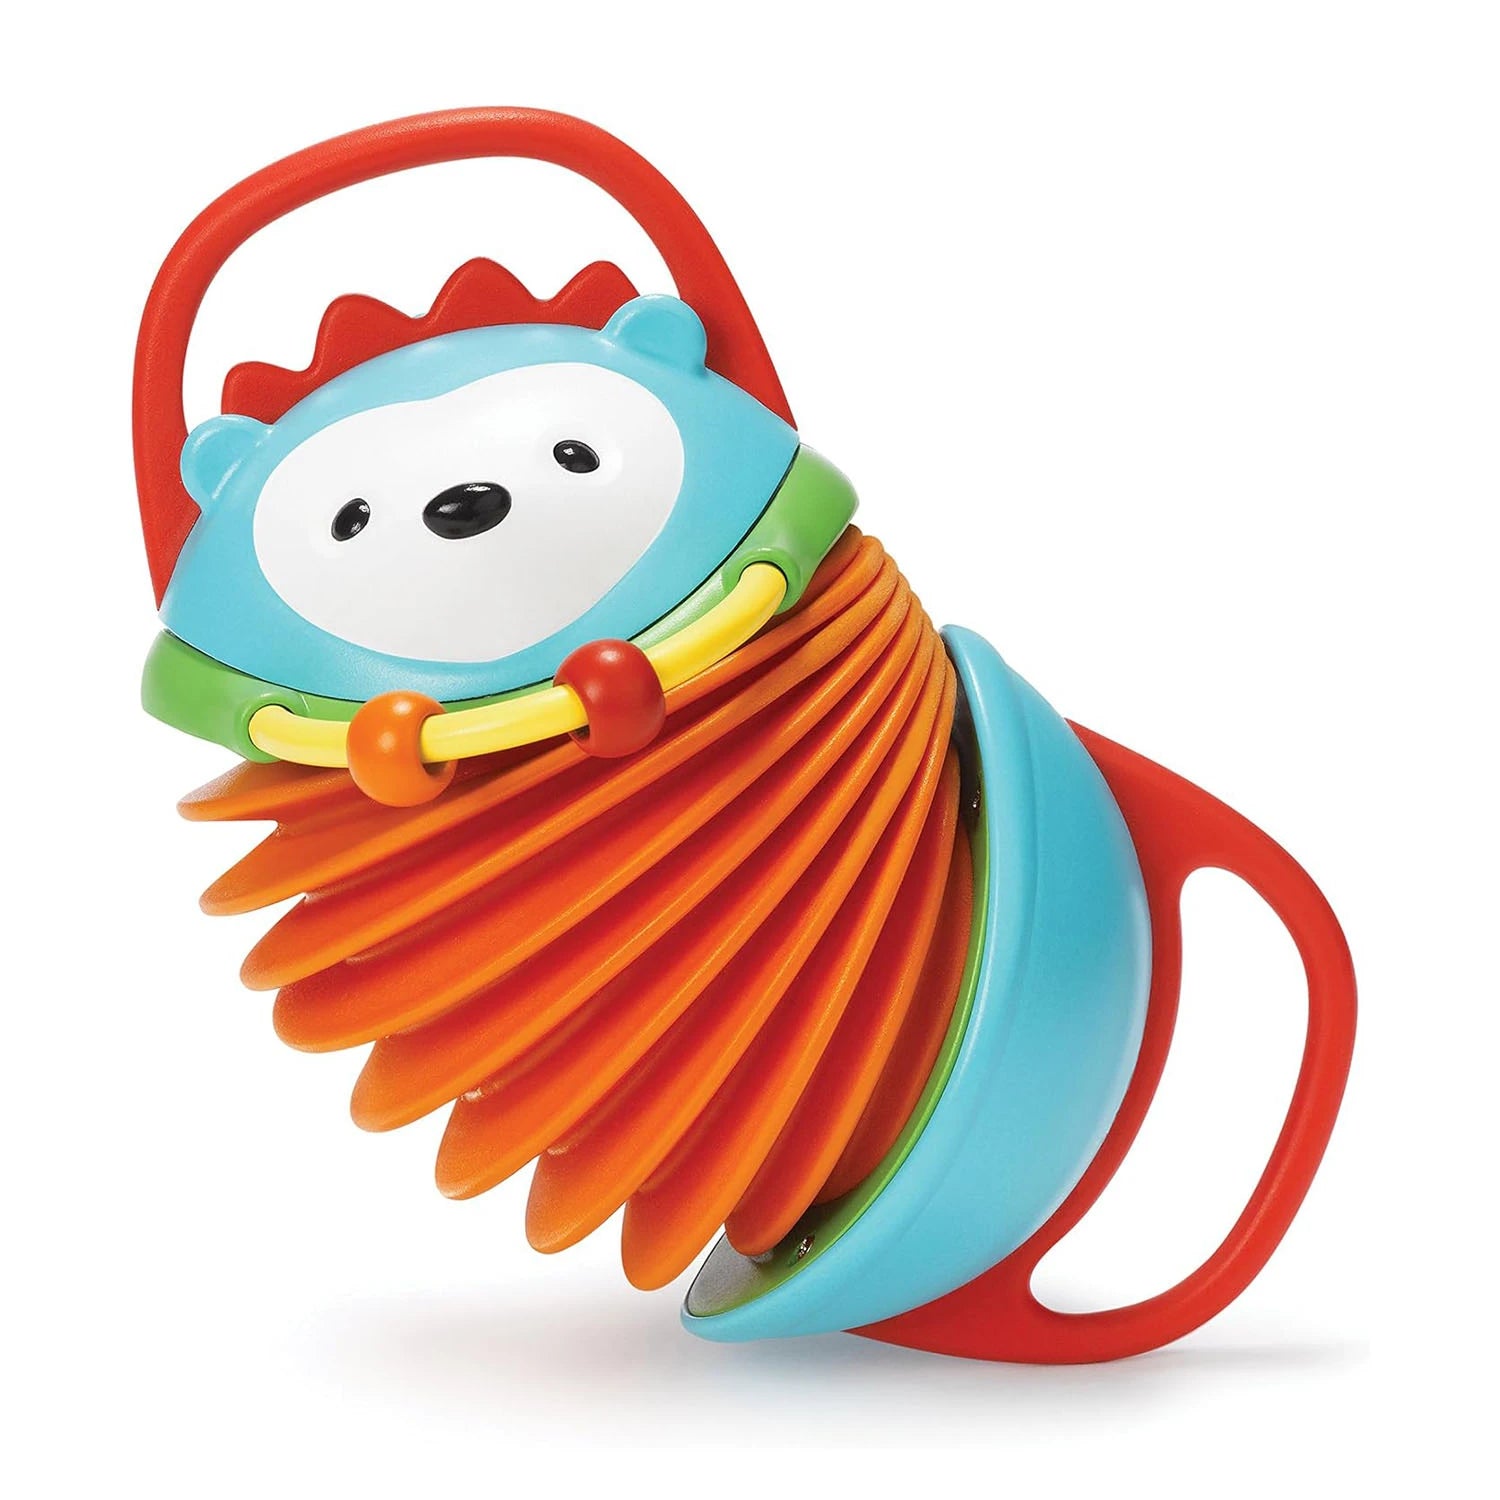 An image of Baby Musical Toy - Kids Accordion - Explore & More Hedgehog Accordion Toy | Skip...